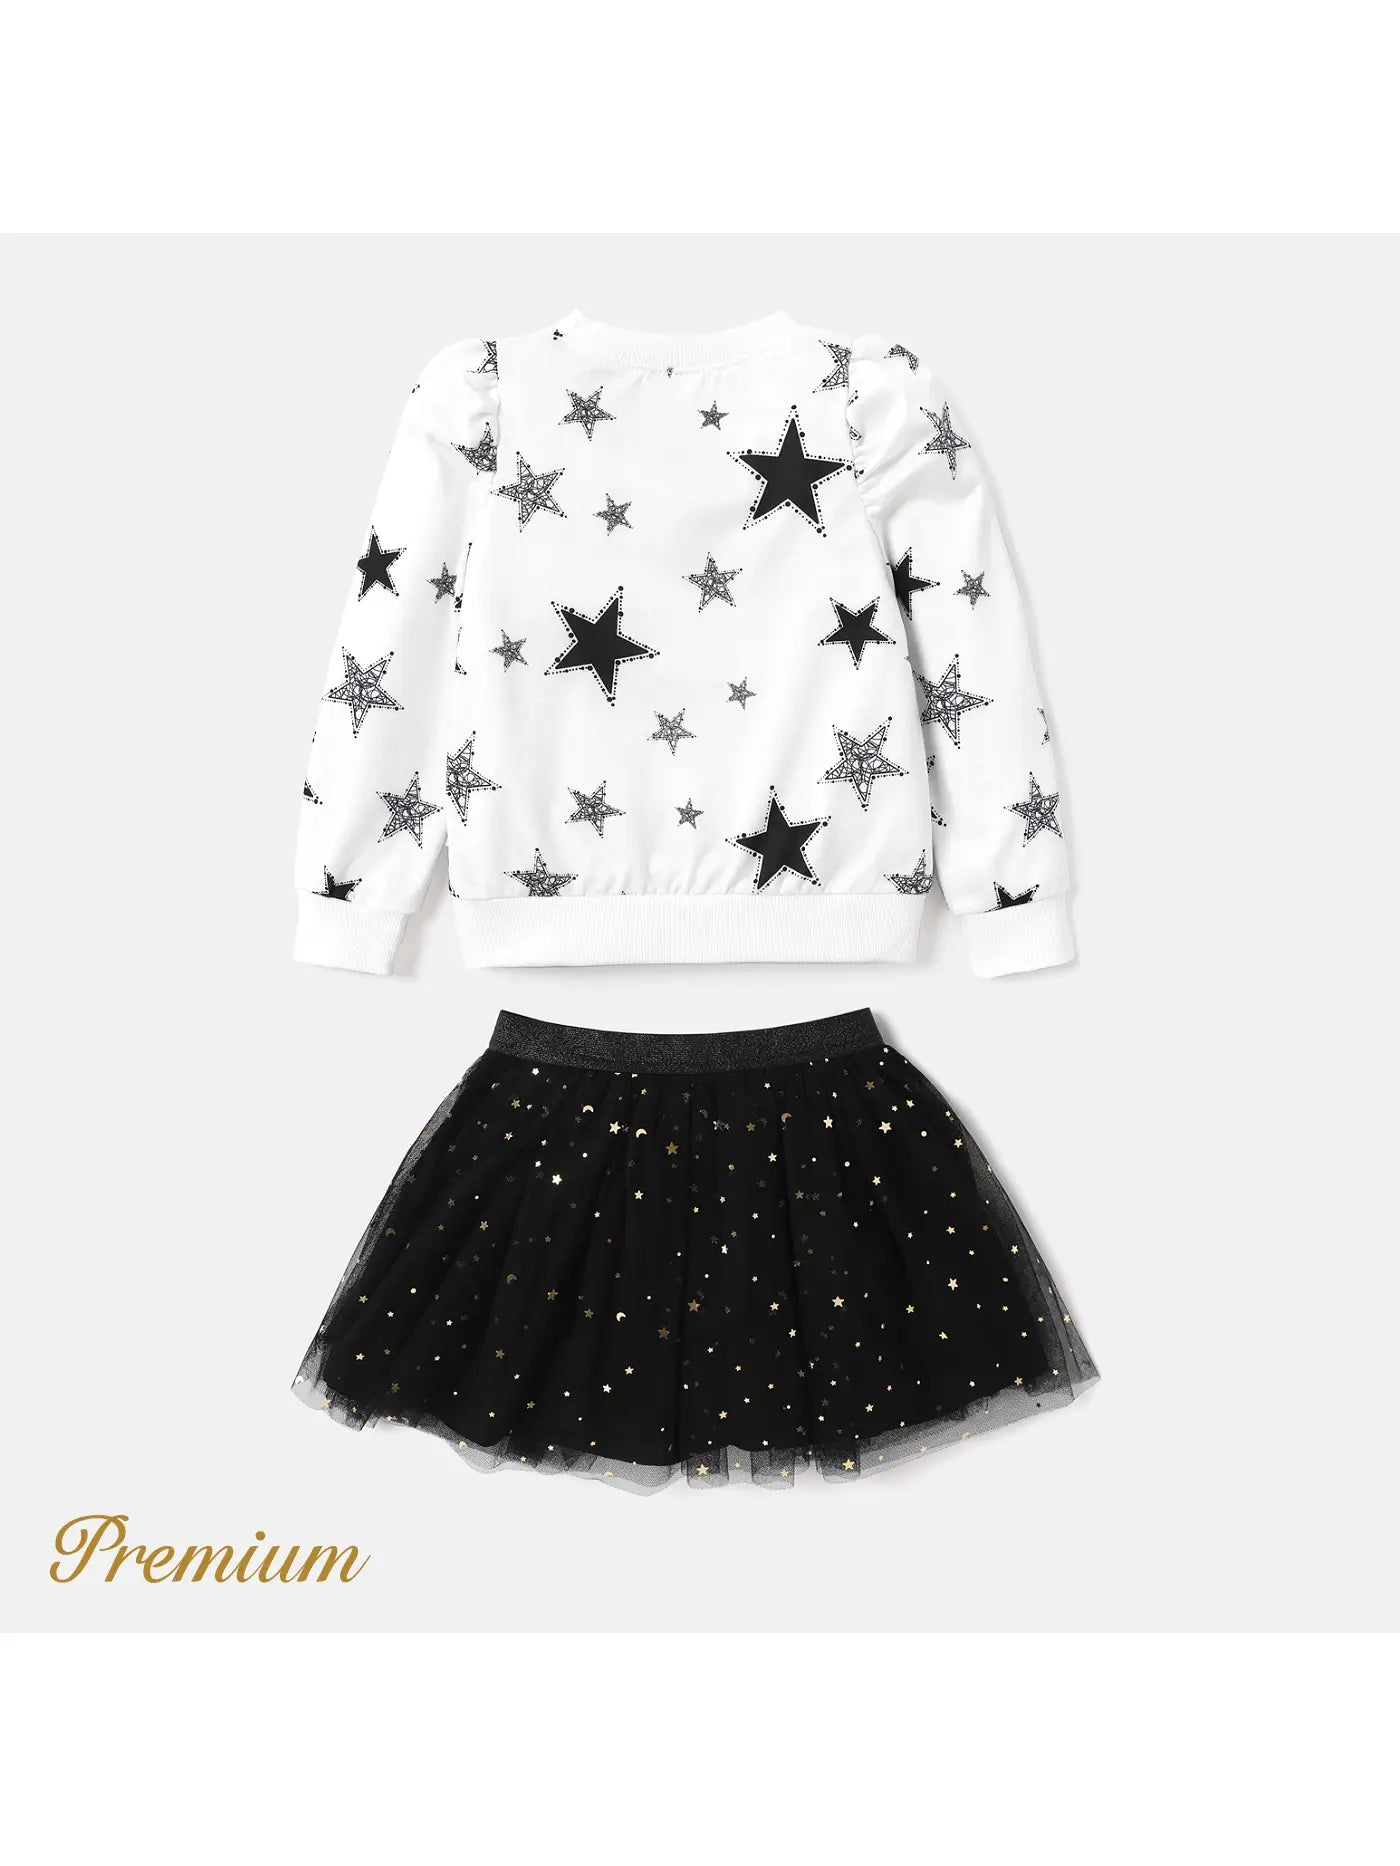 Black and Silver Star Tutu Outfit